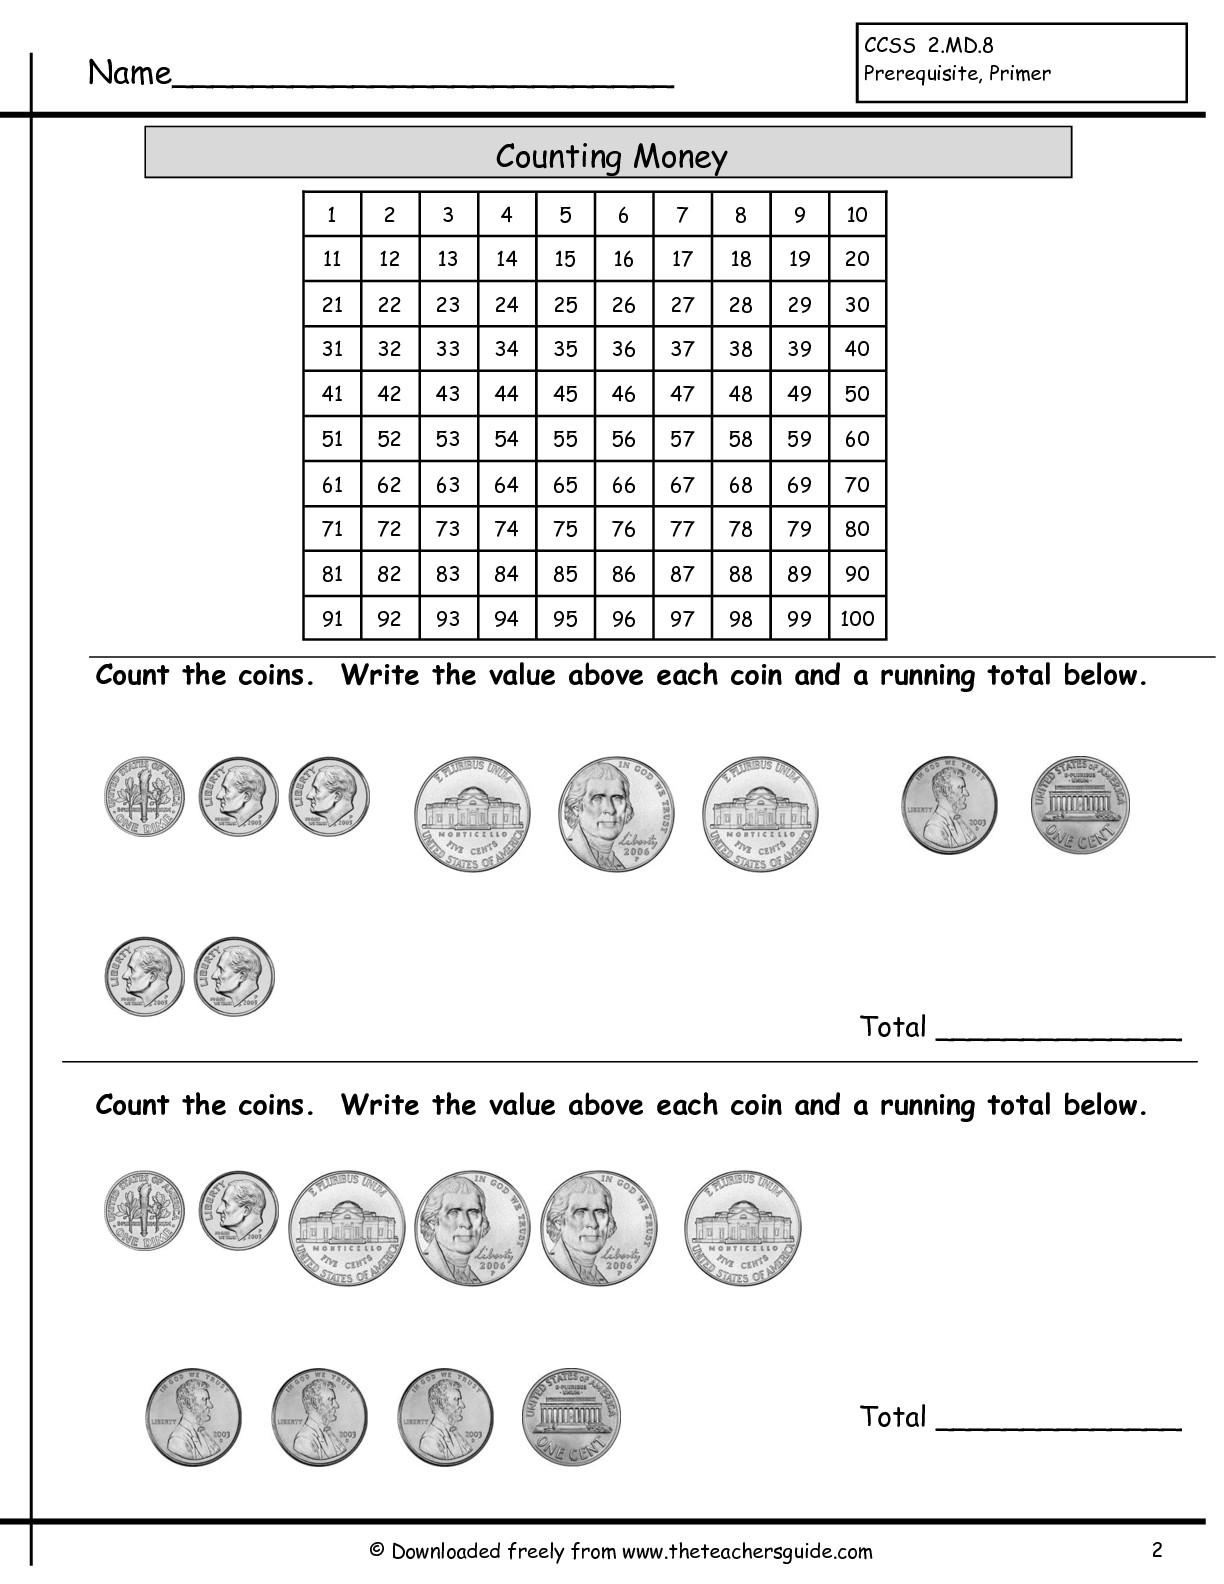 Skip Counting with Coins Image